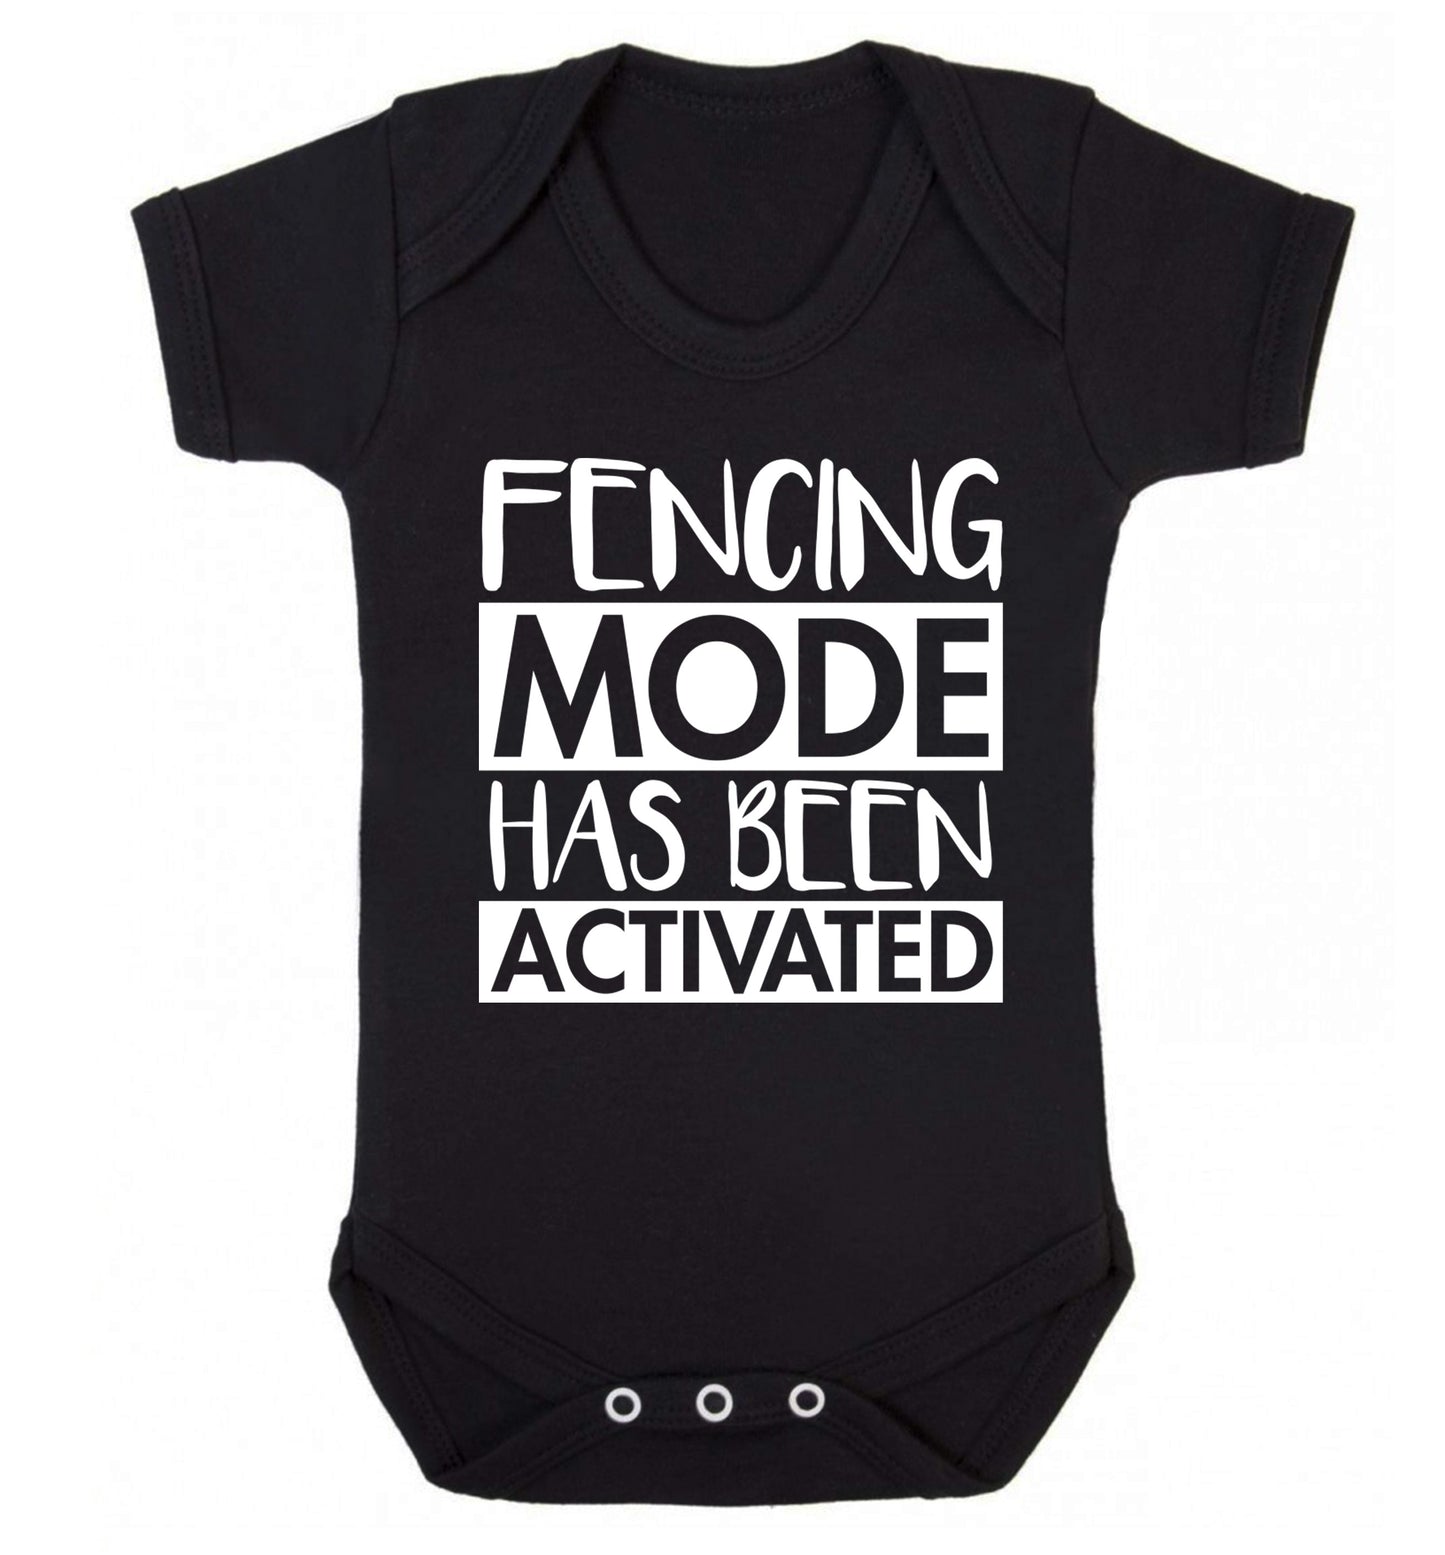 Fencing mode activated Baby Vest black 18-24 months